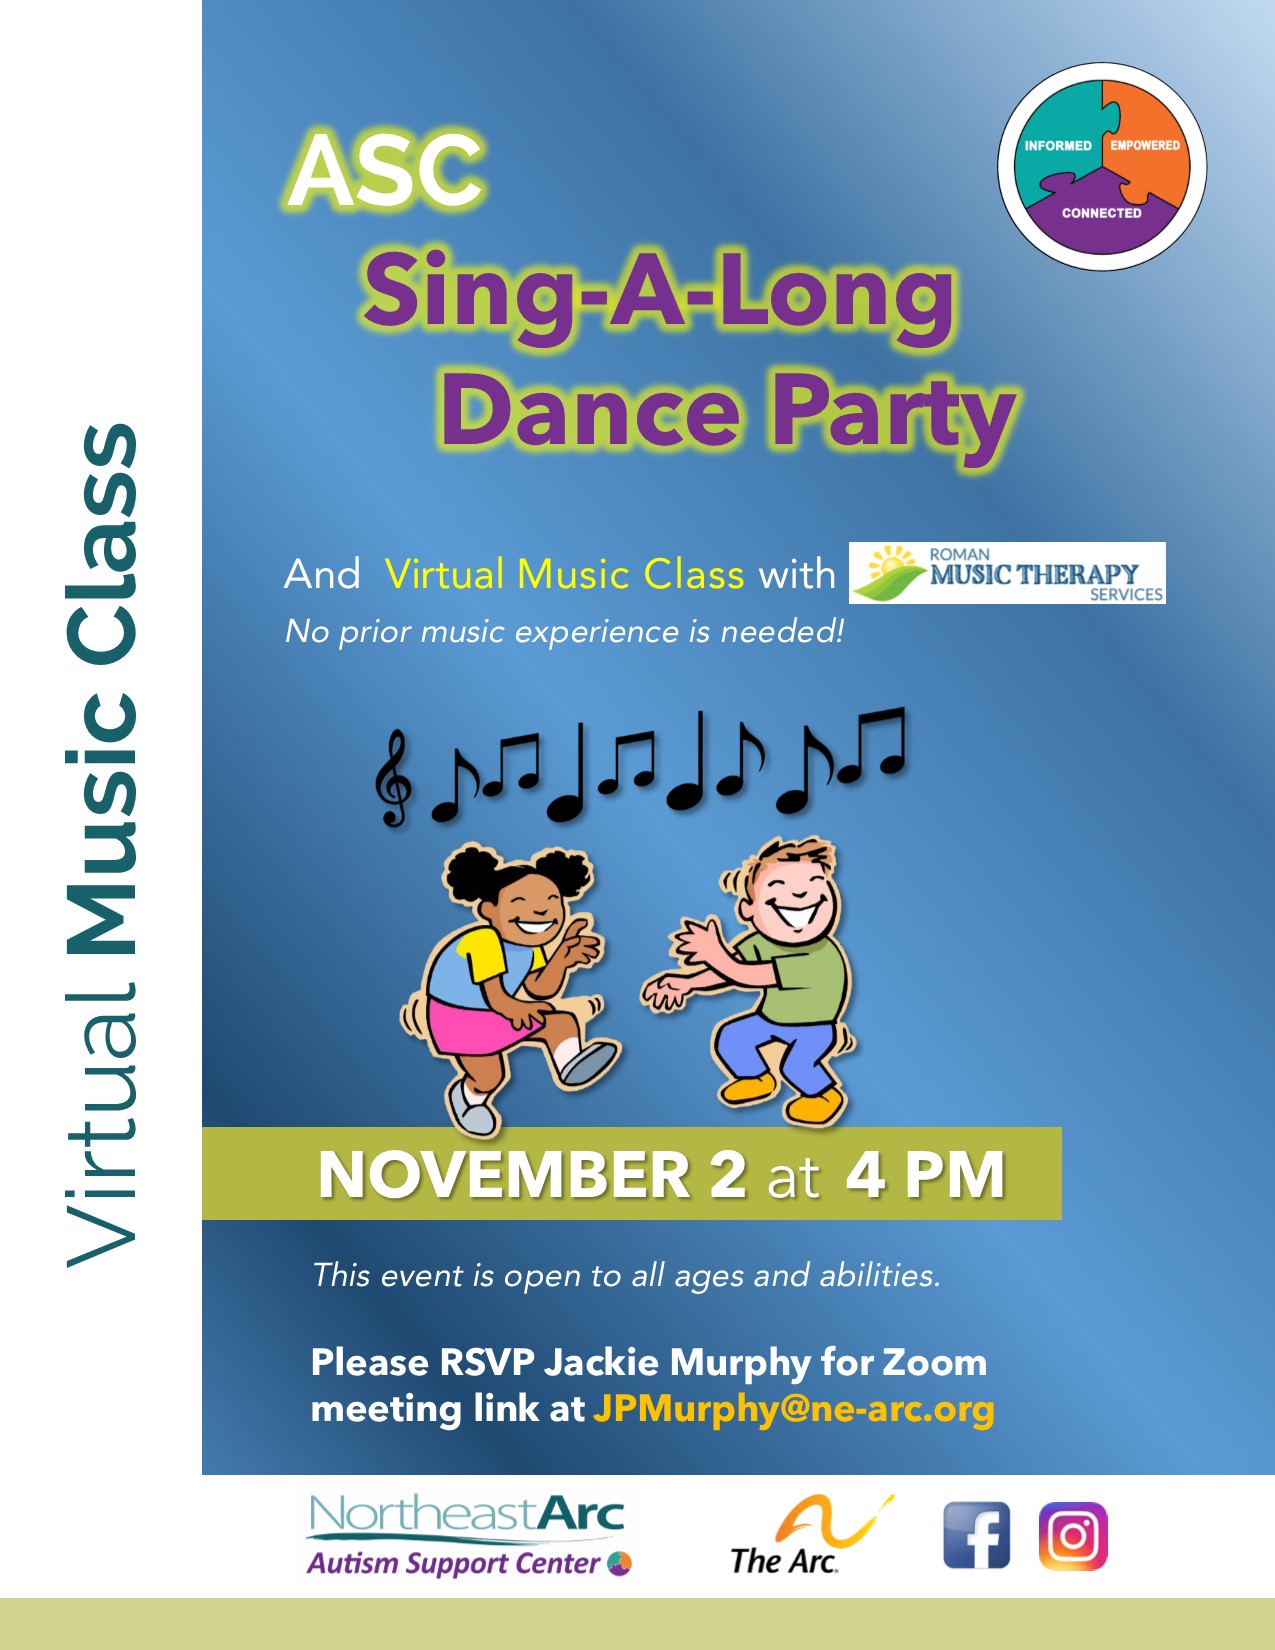 Flyer for ASC Family Fun - Sing-A-Long Dance Party Event